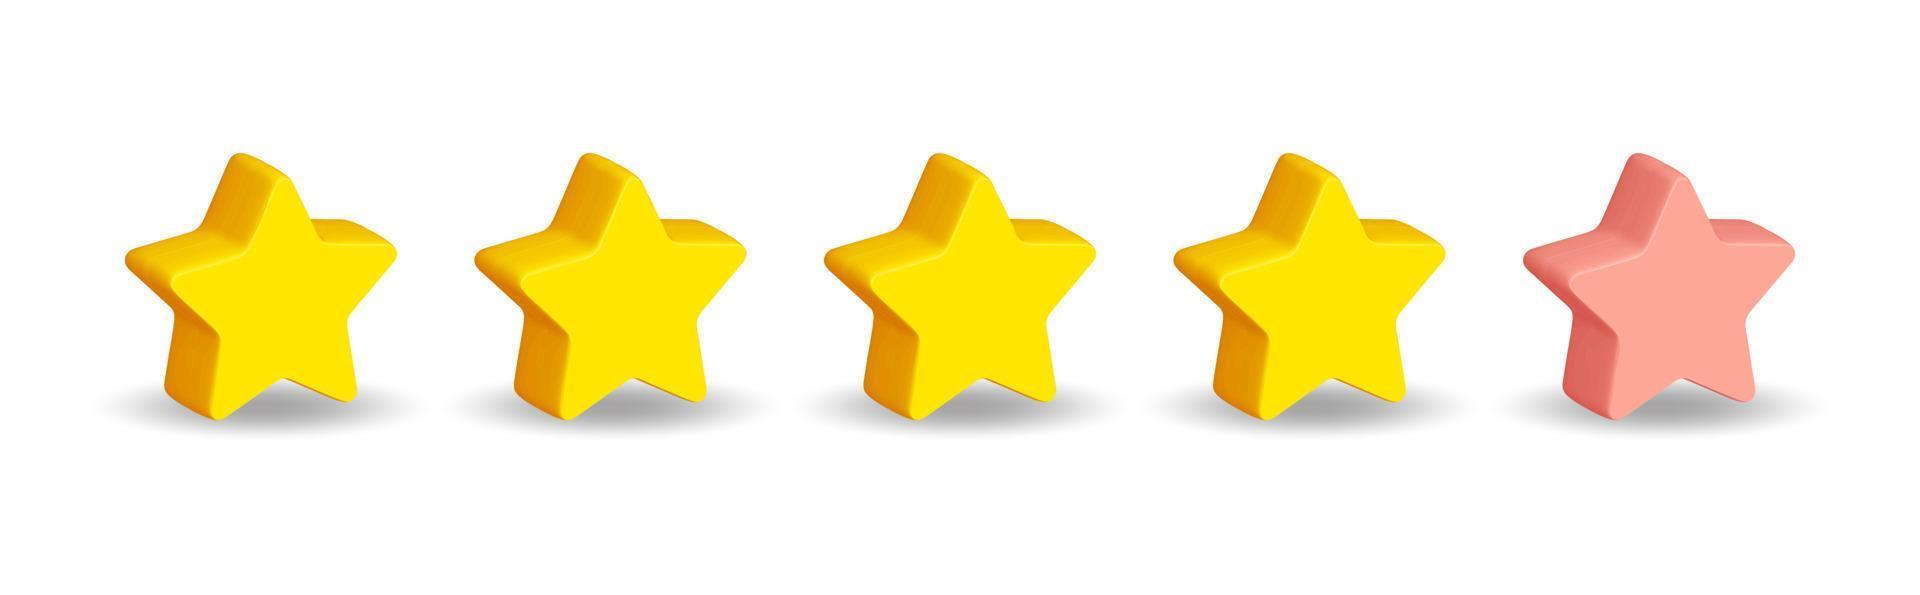 Five stars, glossy yellow and pink colors. vector